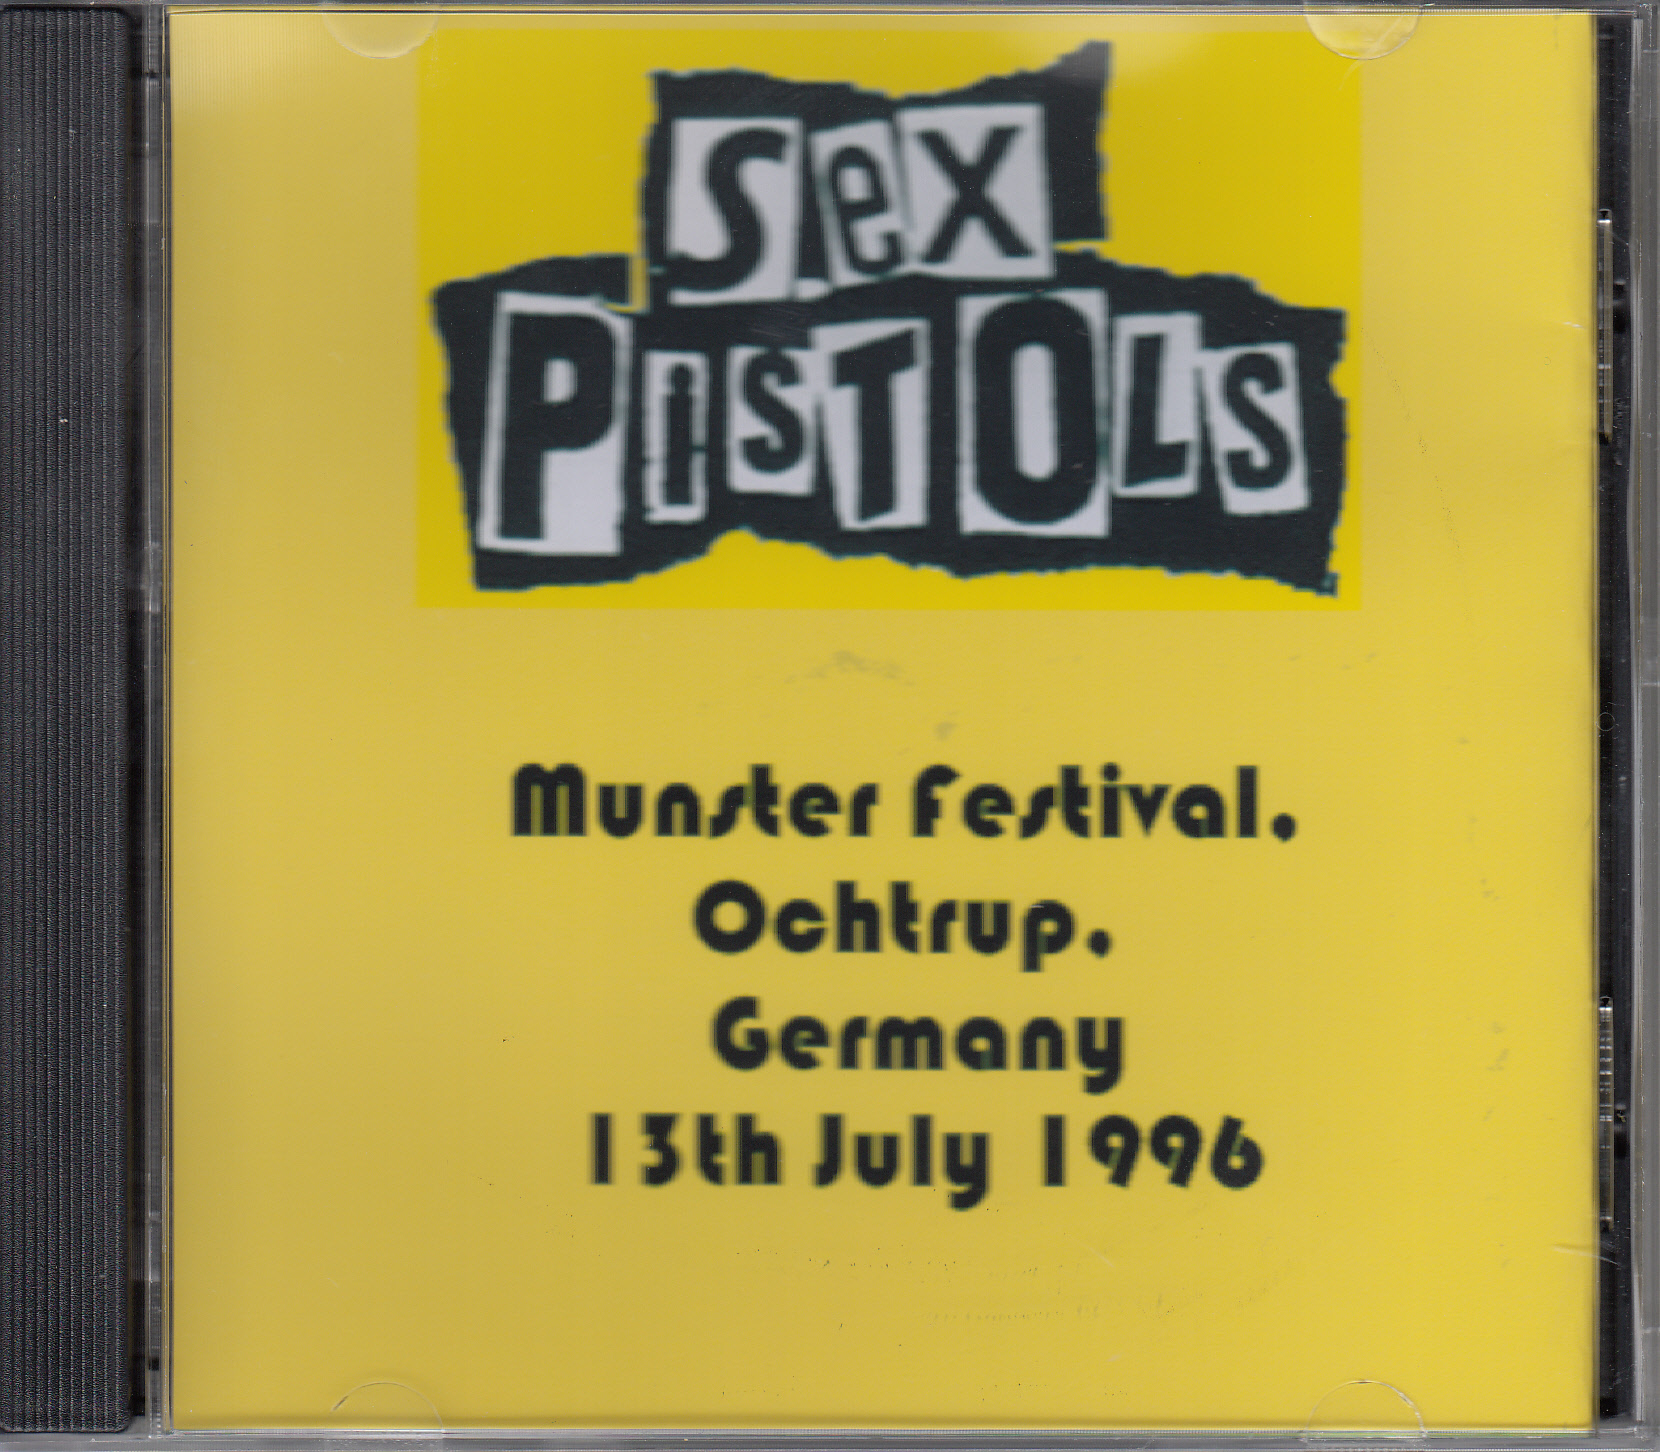 Cd front